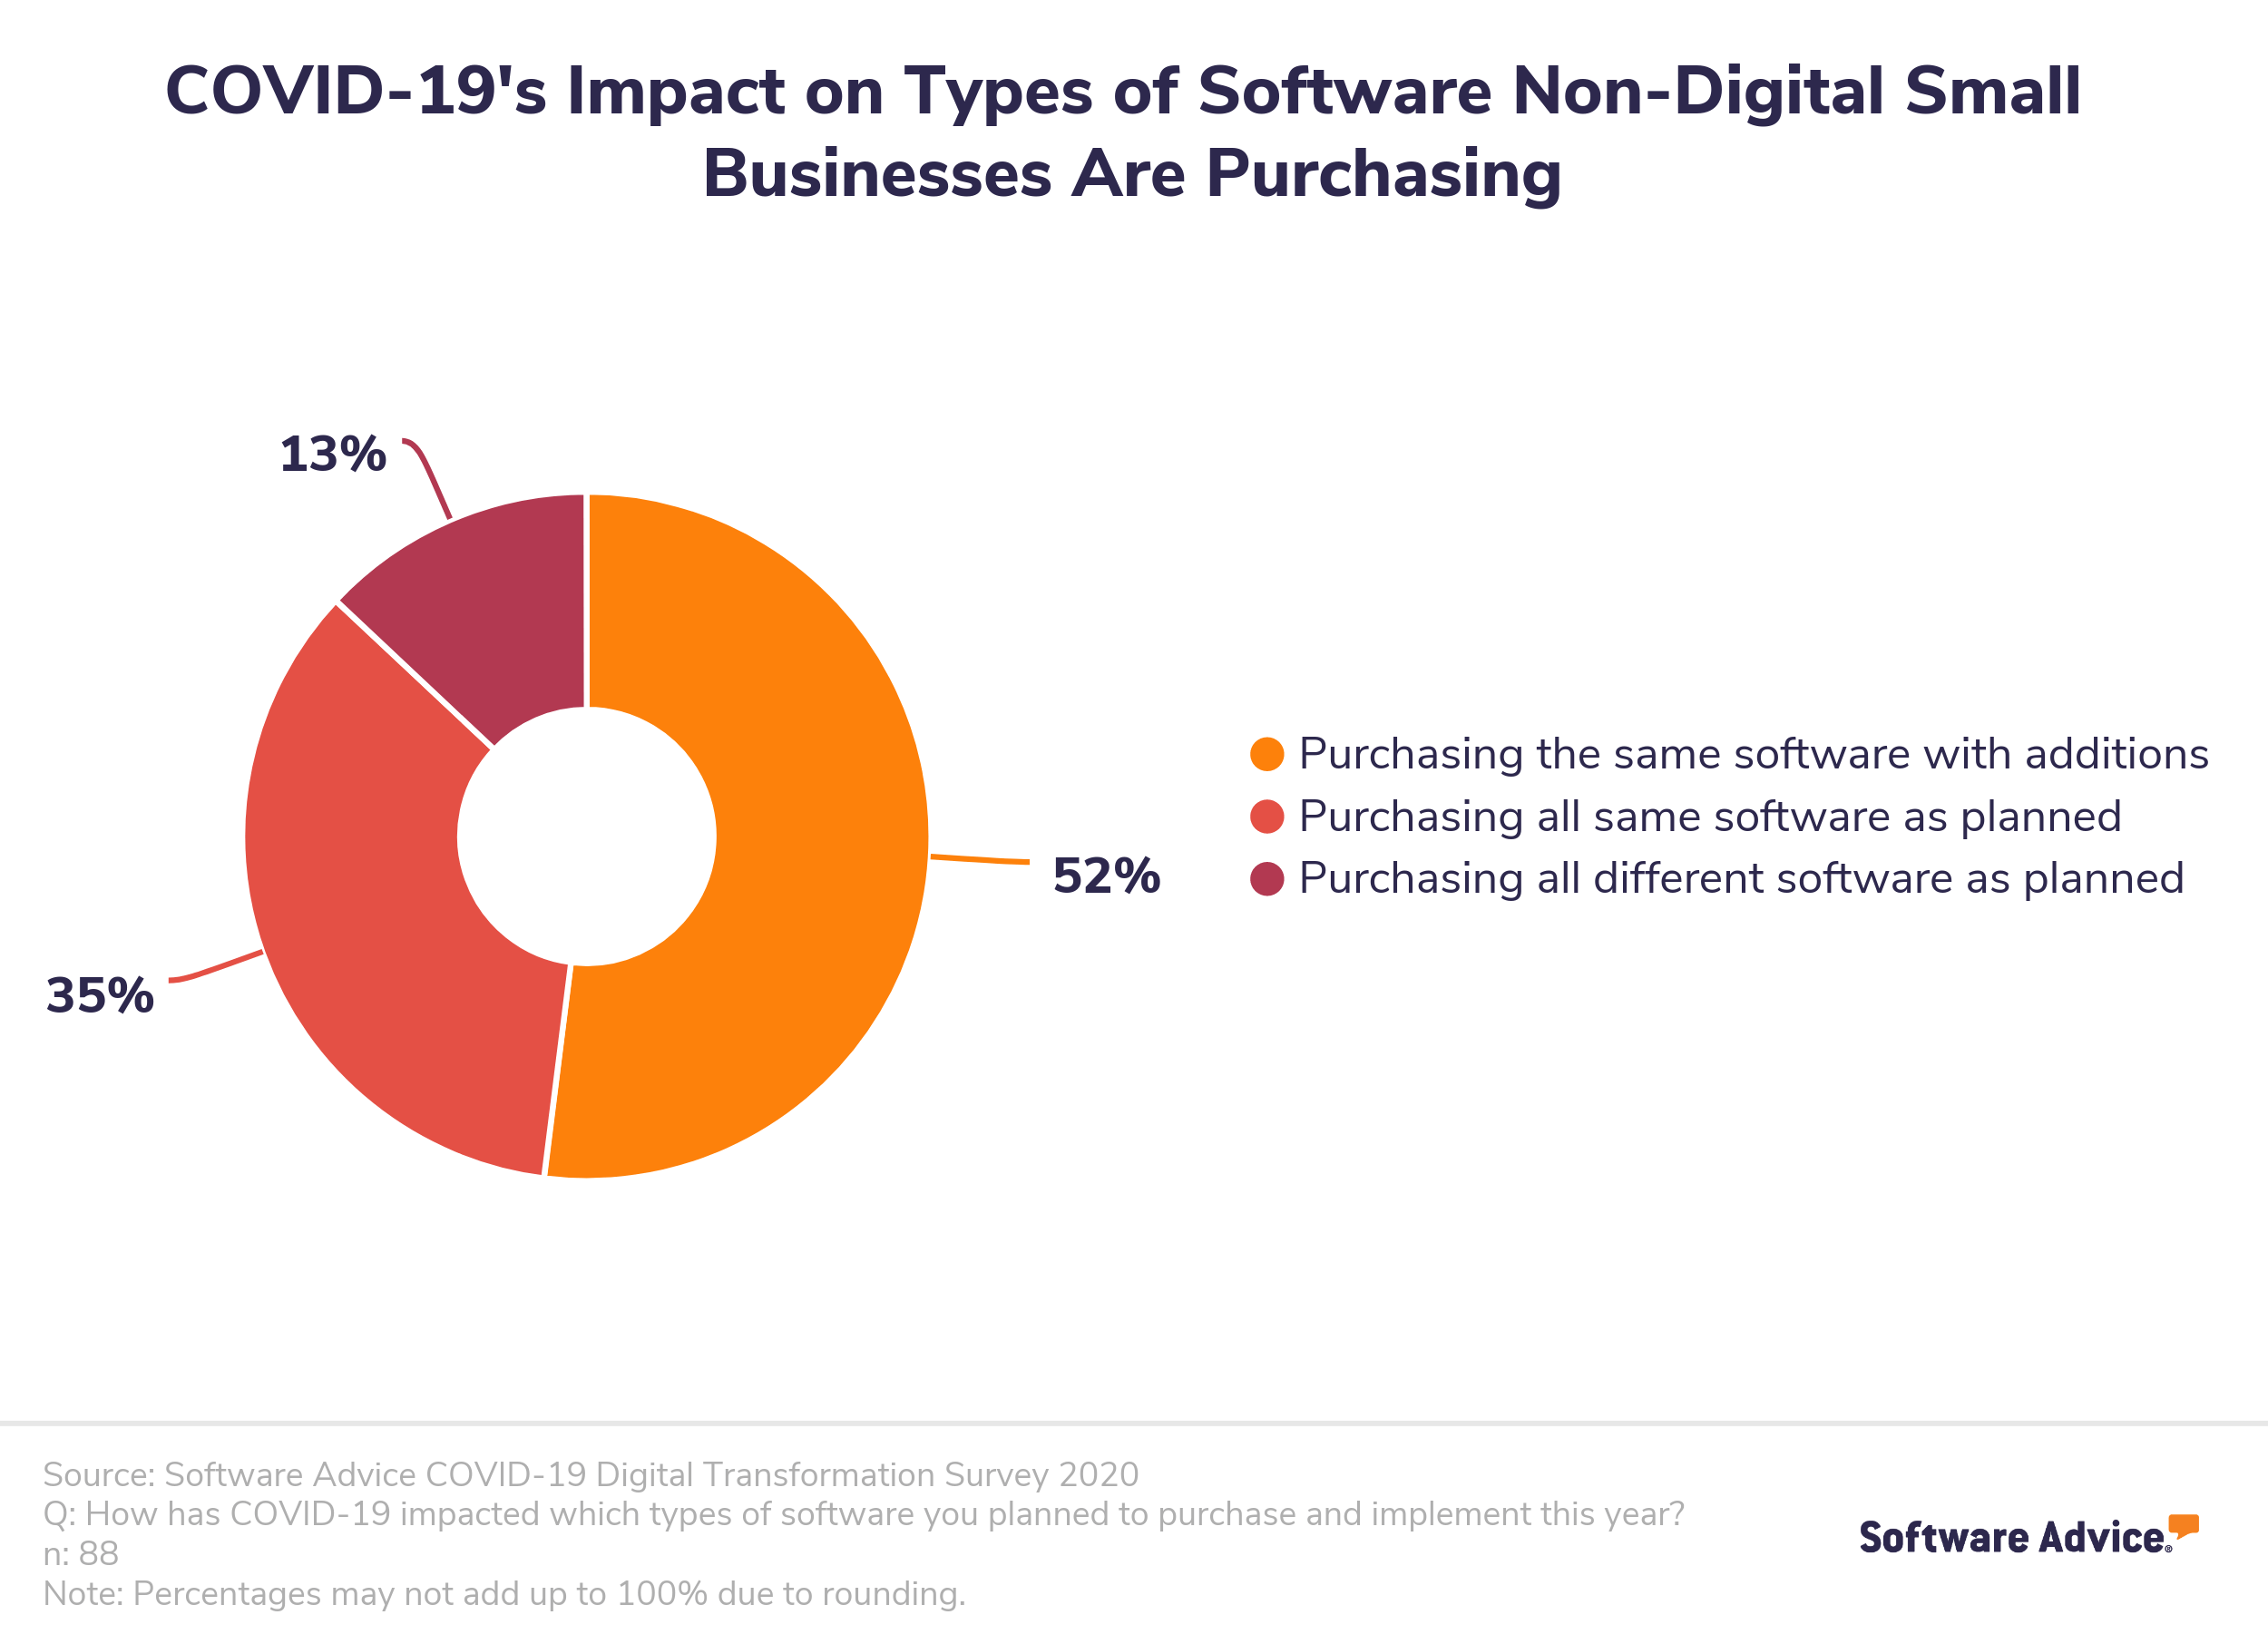 Pie-chart-showing-the-types-of-software-non-digital-small-businesses-are-purchasing-due-to-COVID-19.